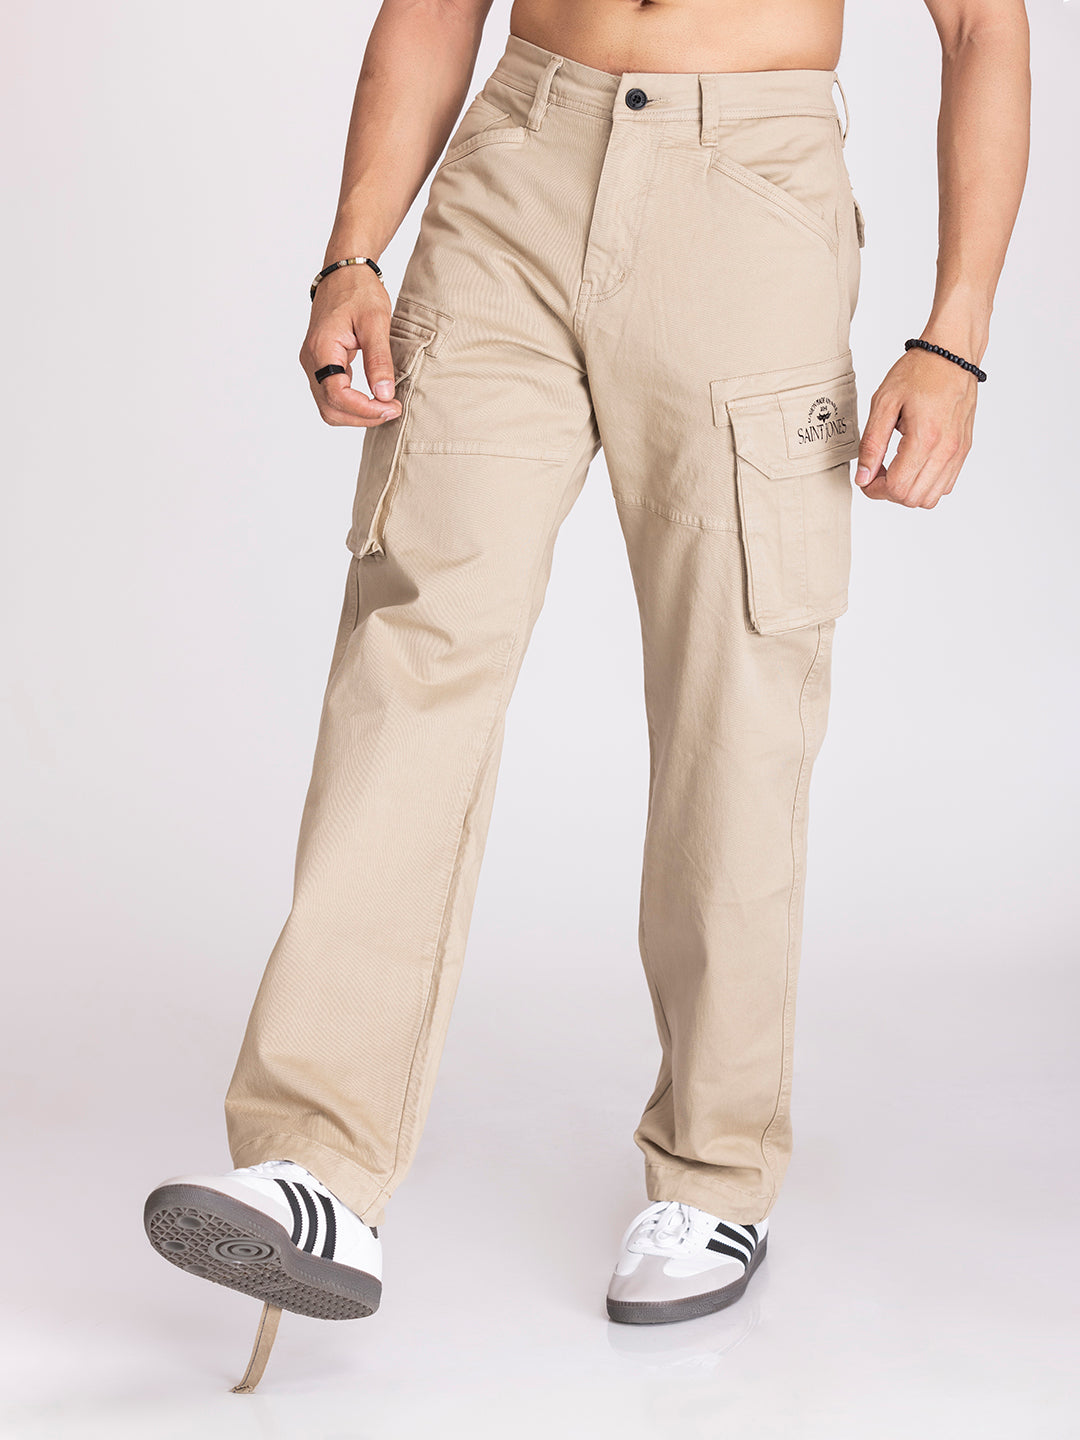 Tactical Field Pants Lightweight Stretch Ripstop 6-Pocket Cargo Uniform  Military